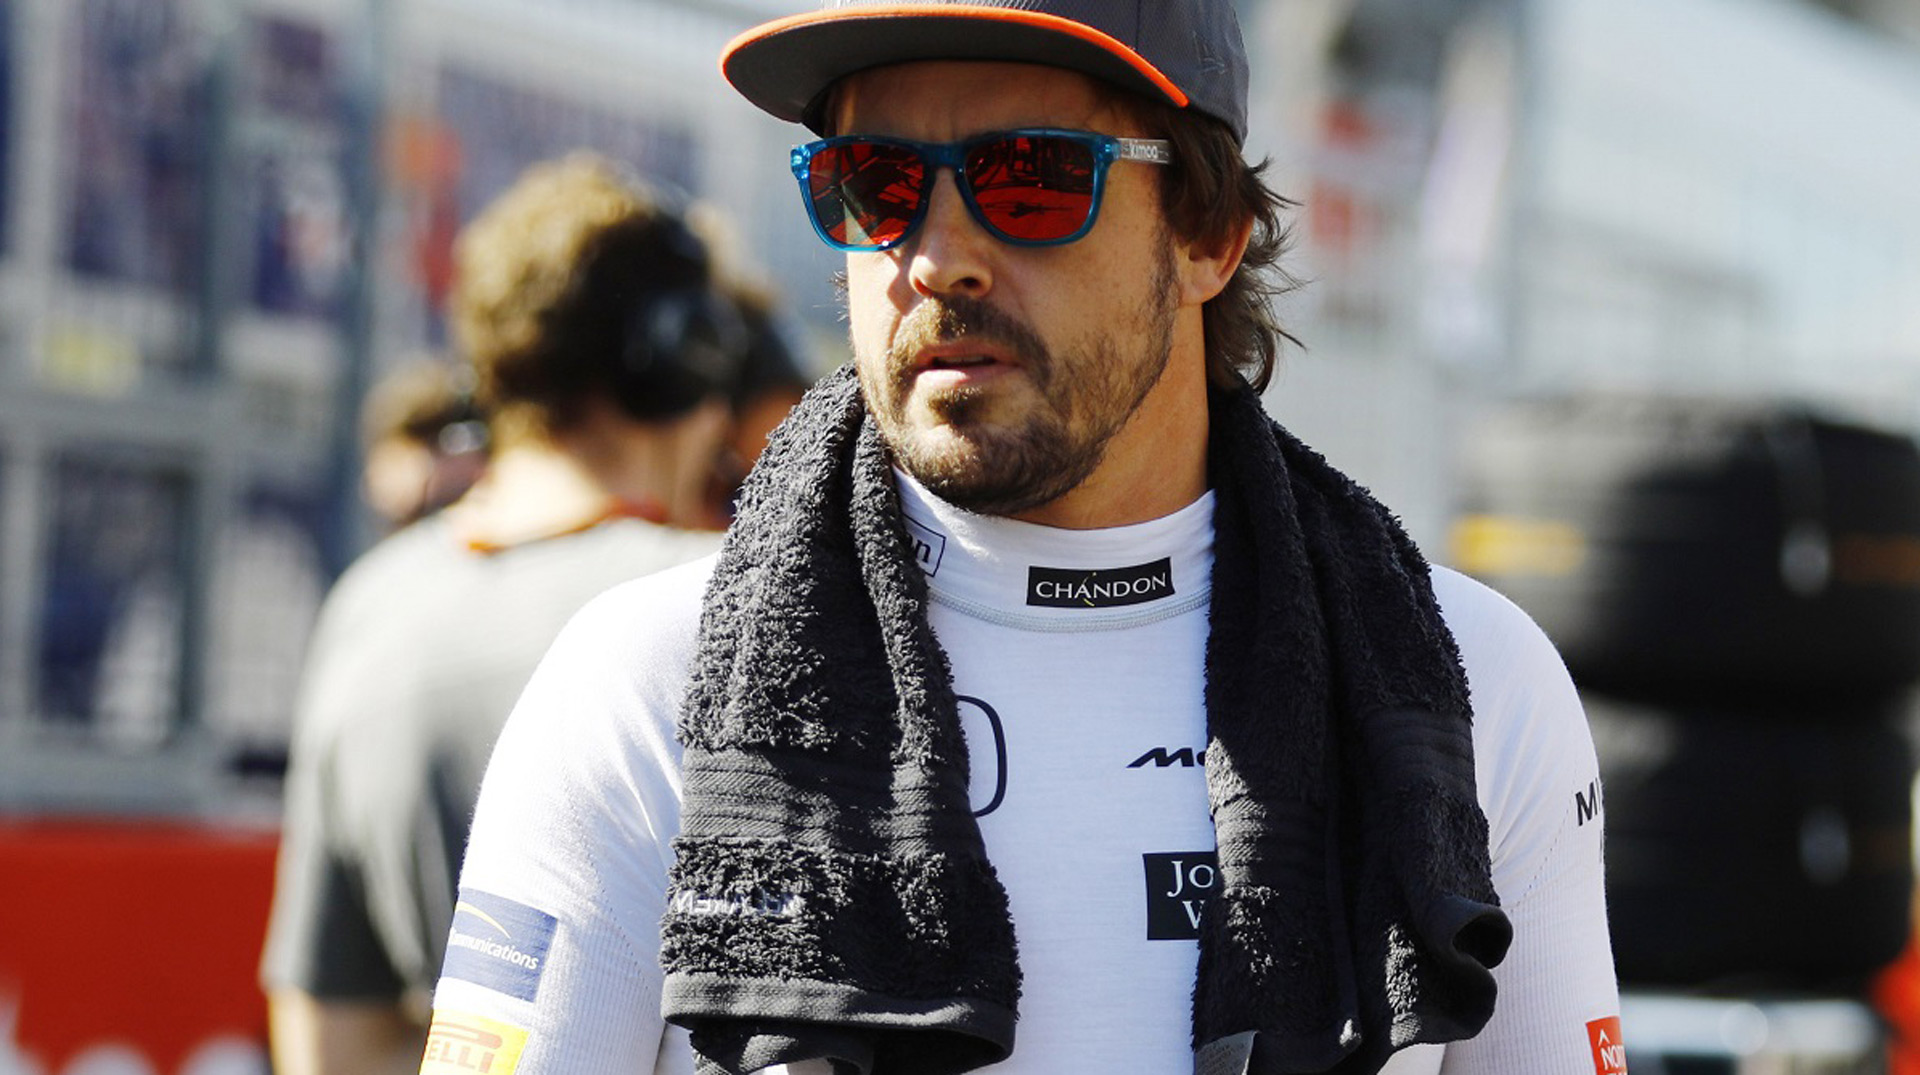 Fernando Alonso will race at Le Mans with Toyota